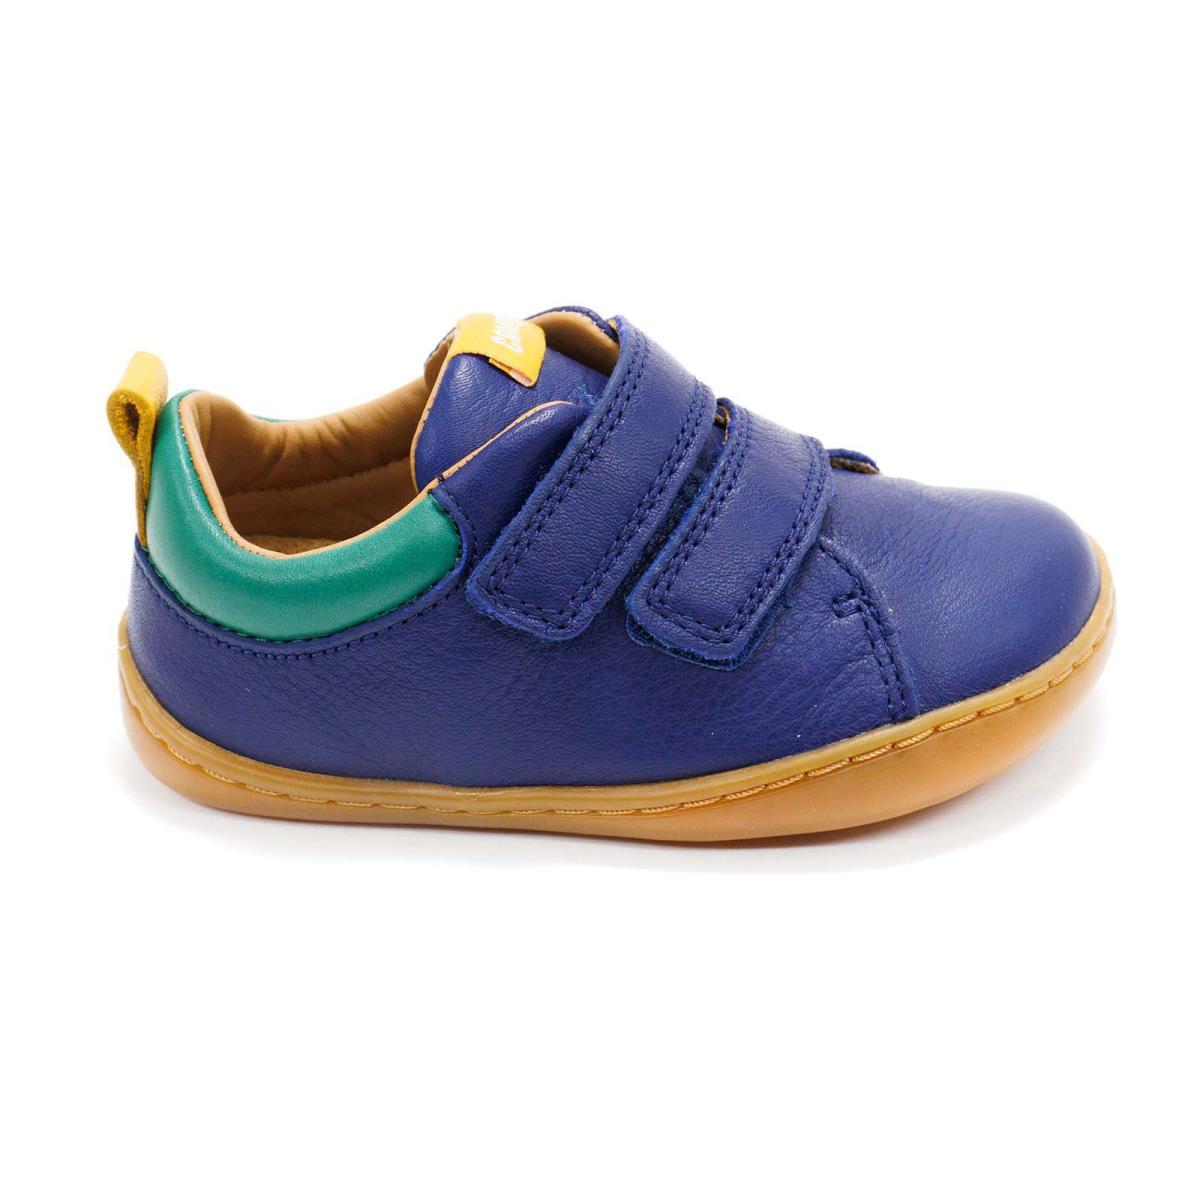 Infant Camper Peu Cami Leather Sneakers with Hook and Loop Closure Toddler Shoes - Blue